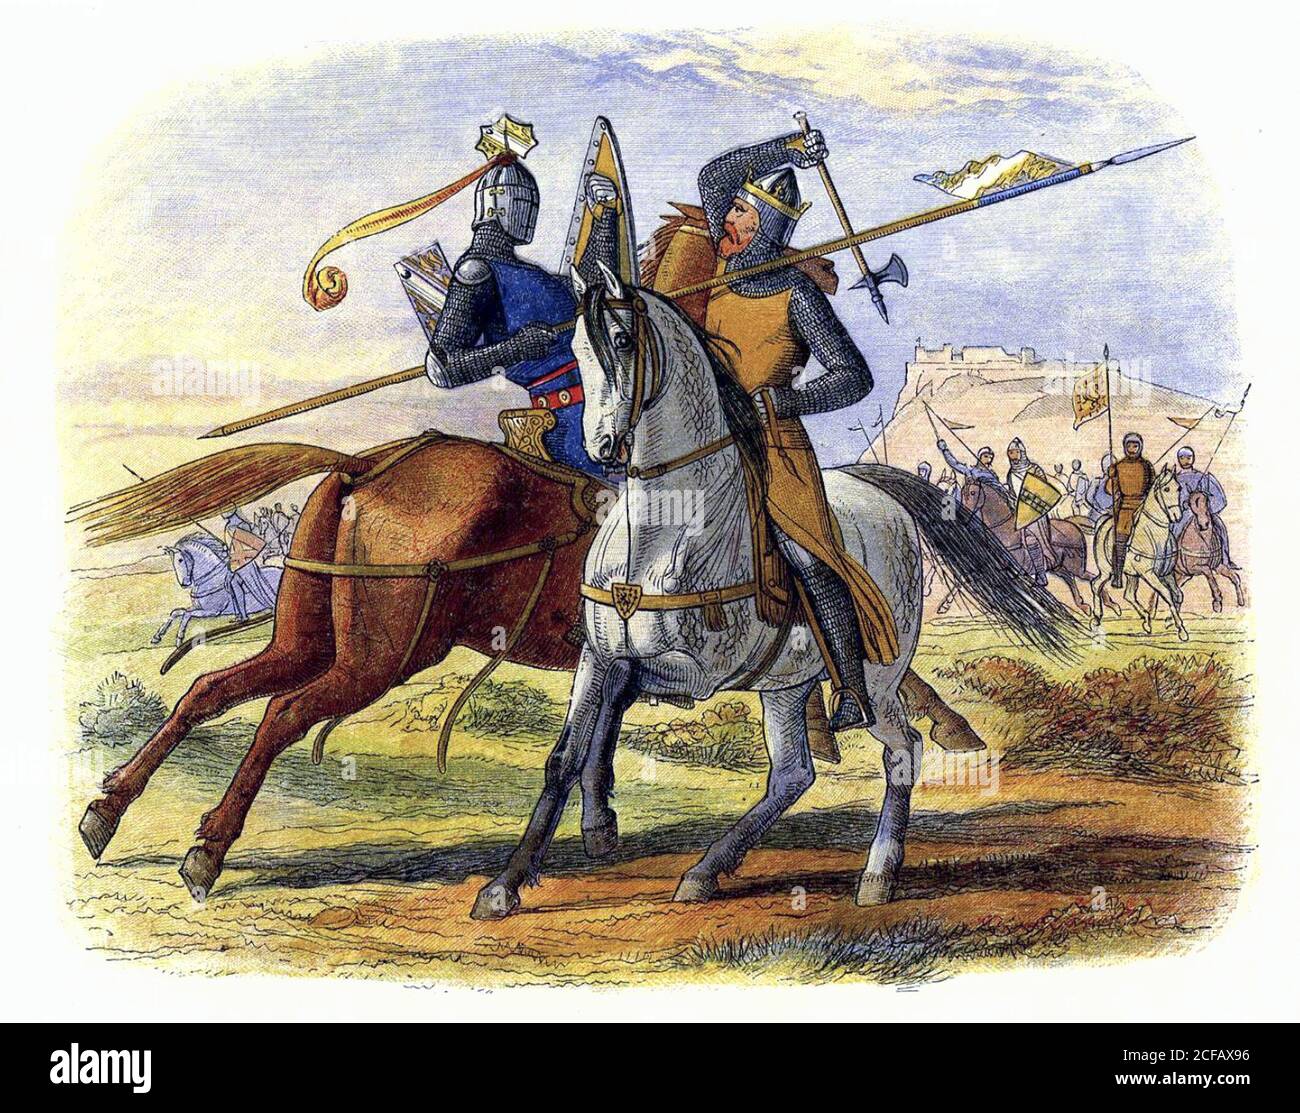 Robert the Bruce fighting Sir Henry Bohun during the Battle of Bannockburn, illustration from James William Edmund Doyle's 'A Chronicle of England' (1864), Stock Photo